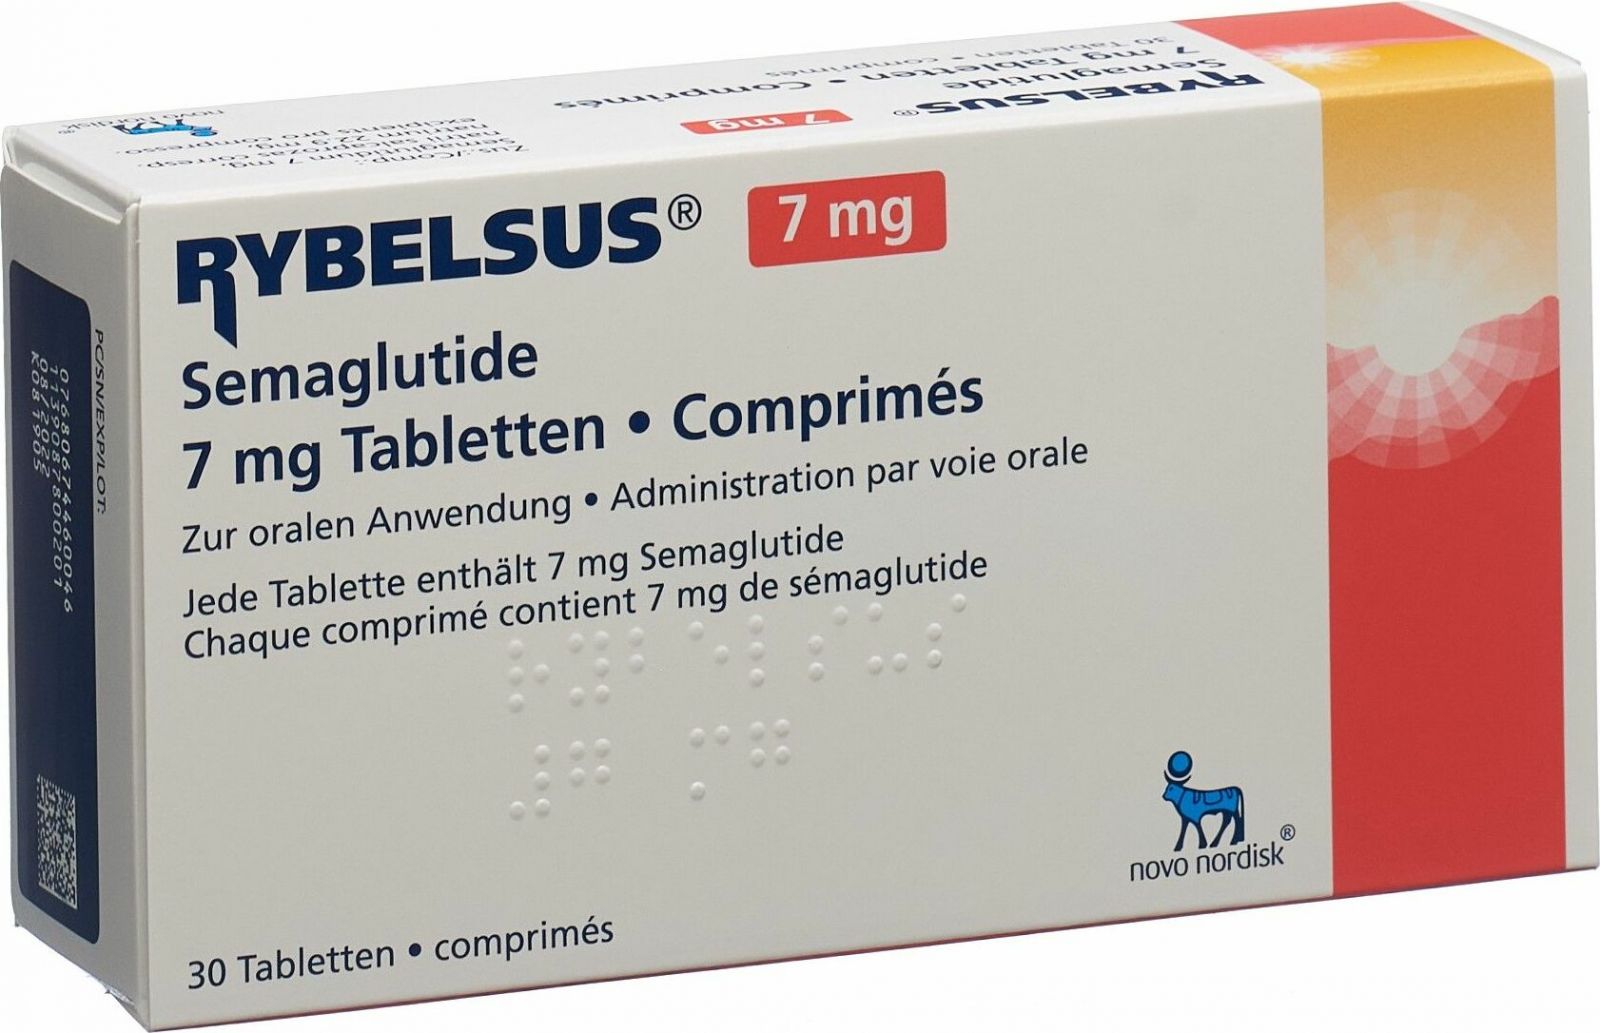 The Evolution of Pharmaceutical Coupons: Case Study of Rybelsus